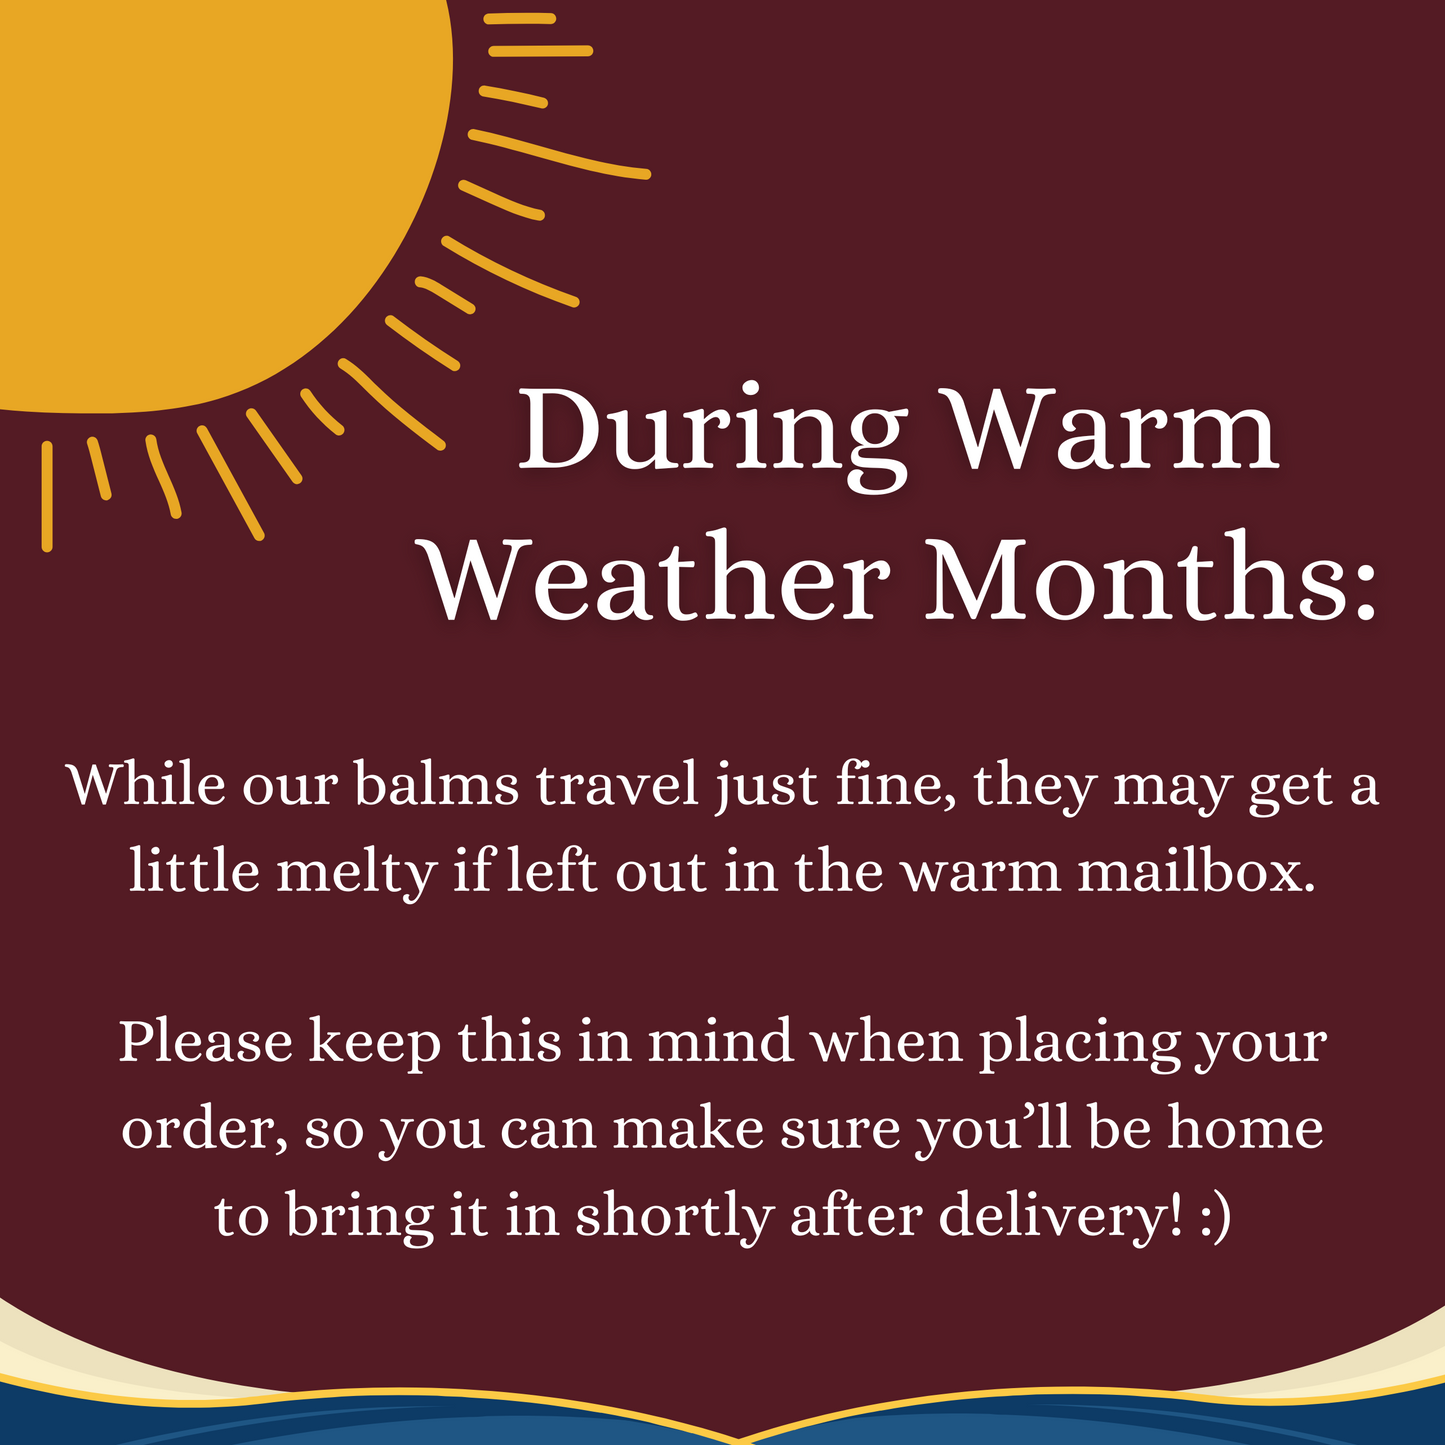 Infographic stating that our lip balms travel just fine, but they may get a little melty if left out in the warm mailbox. Keep this in mind when ordering, so you can ensure you'll be home to bring it in!